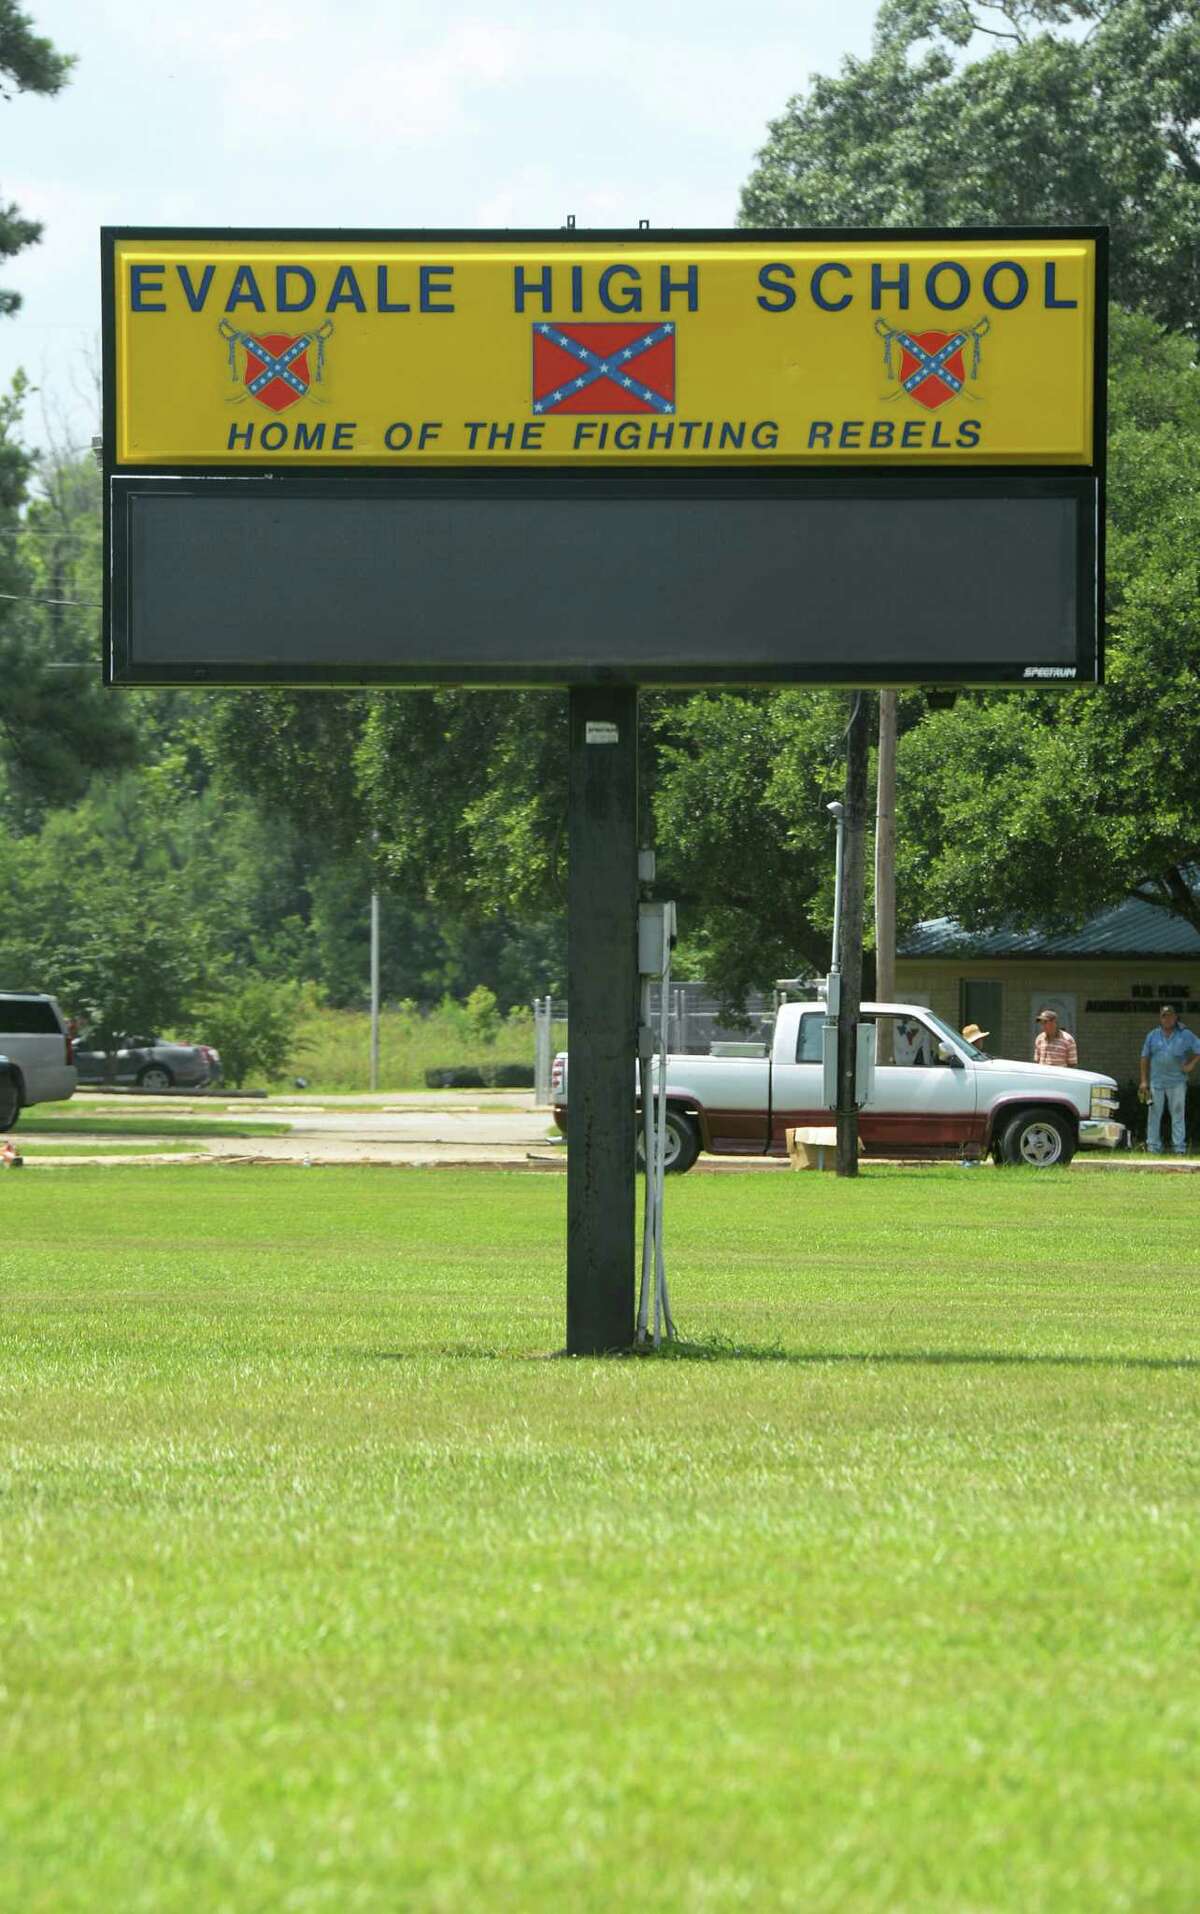 Along with several other confederate symbols around campus, Evadale's High School's marquee crew contains the Confederate flag. Due to the recent South Carolina shooting, several states and large companies are reconsidering their involvement with the Confederate flag. Photo taken Wednesday, June 24, 2015 Guiseppe Barranco/The Enterprise